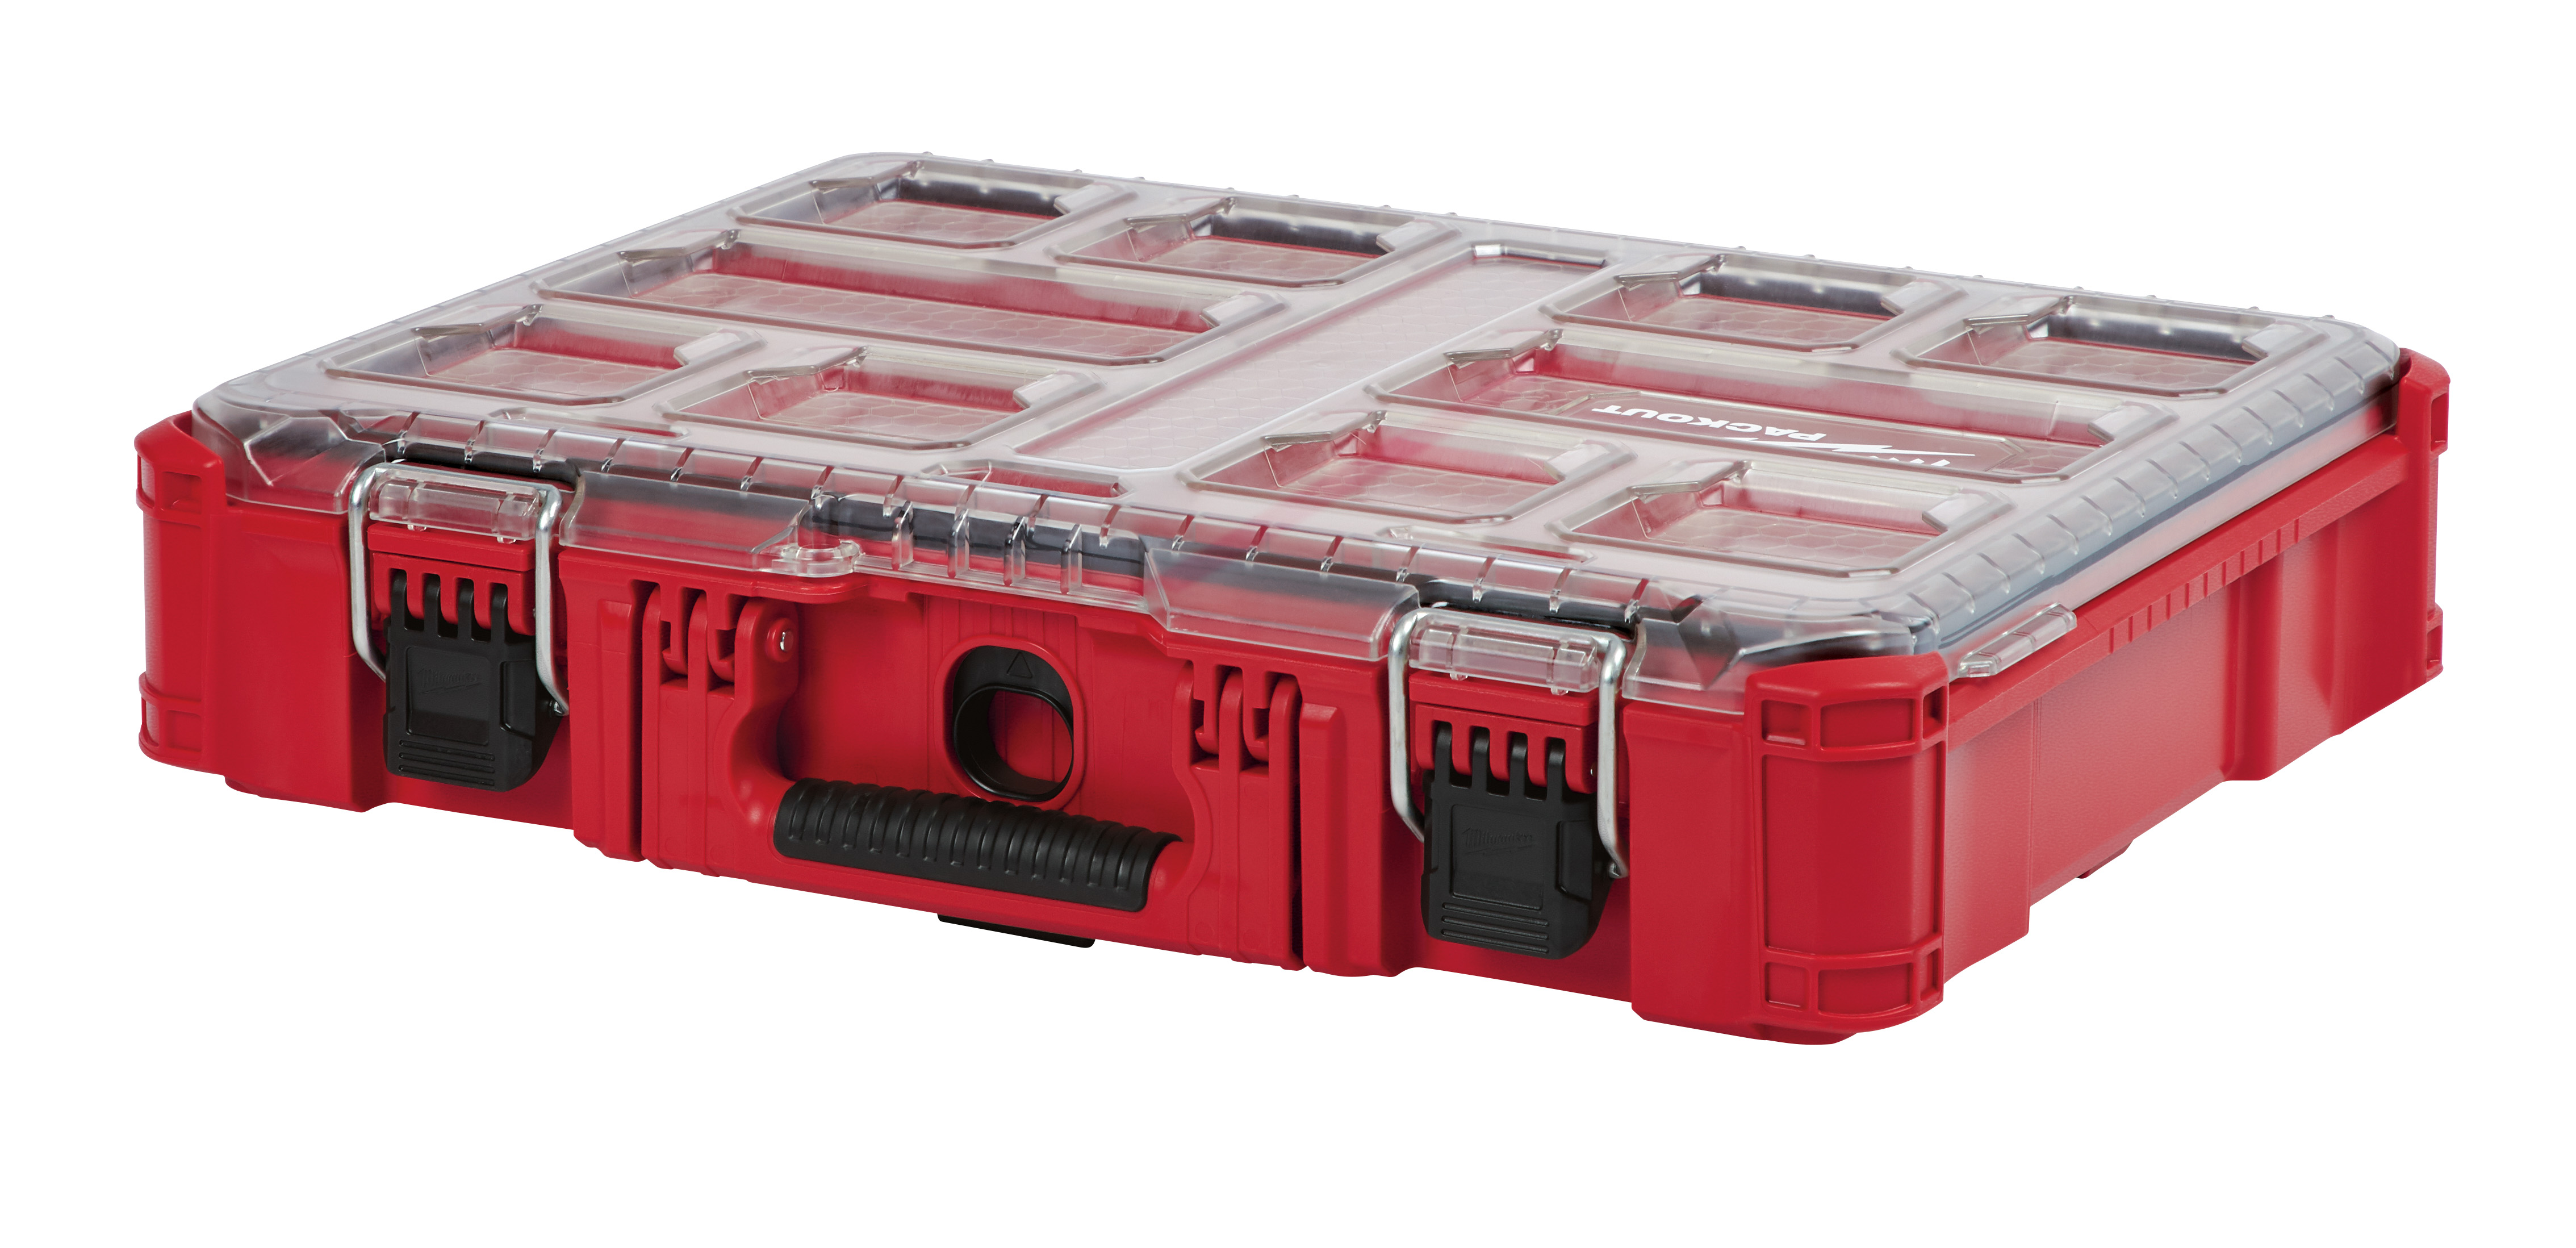 Part of the industry’s most versatile and most durable modular storage system, the Milwaukee PACKOUT™ tool box is constructed with impact resistant polymers and metal reinforced corners to provide up to 75 lbs of weight capacity and ultimate durability in harsh jobsite conditions. Featuring an IP65 rated weather seal to keep out rain and jobsite debris, and integrated organizers bins, the Milwaukee PACKOUT™ tool box is the fully compatible with all Milwaukee PACKOUT™ modular storage products.